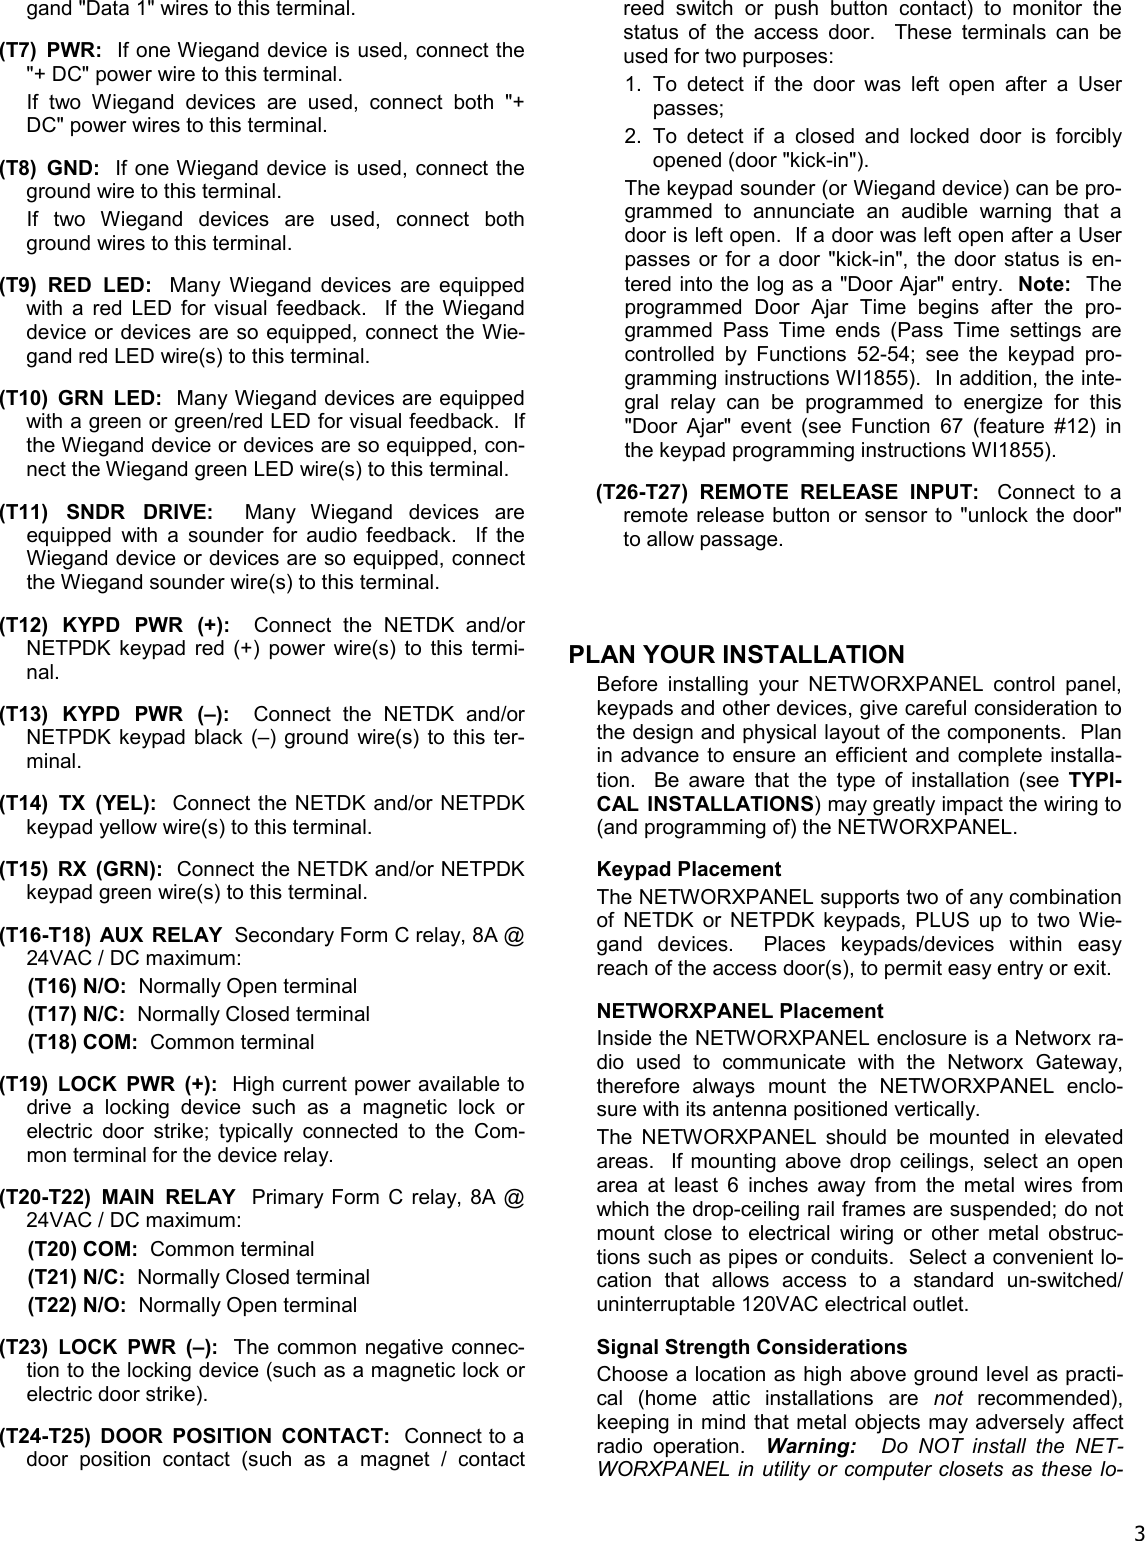 Page 3 of 12 - Alarm Lock NETWORXPANEL_WI1856B.02_INST NETWORXPANEL Wireless Networx Control Panel (NETDK/NETPDK) Installation Instructions WI1856B.02 INST